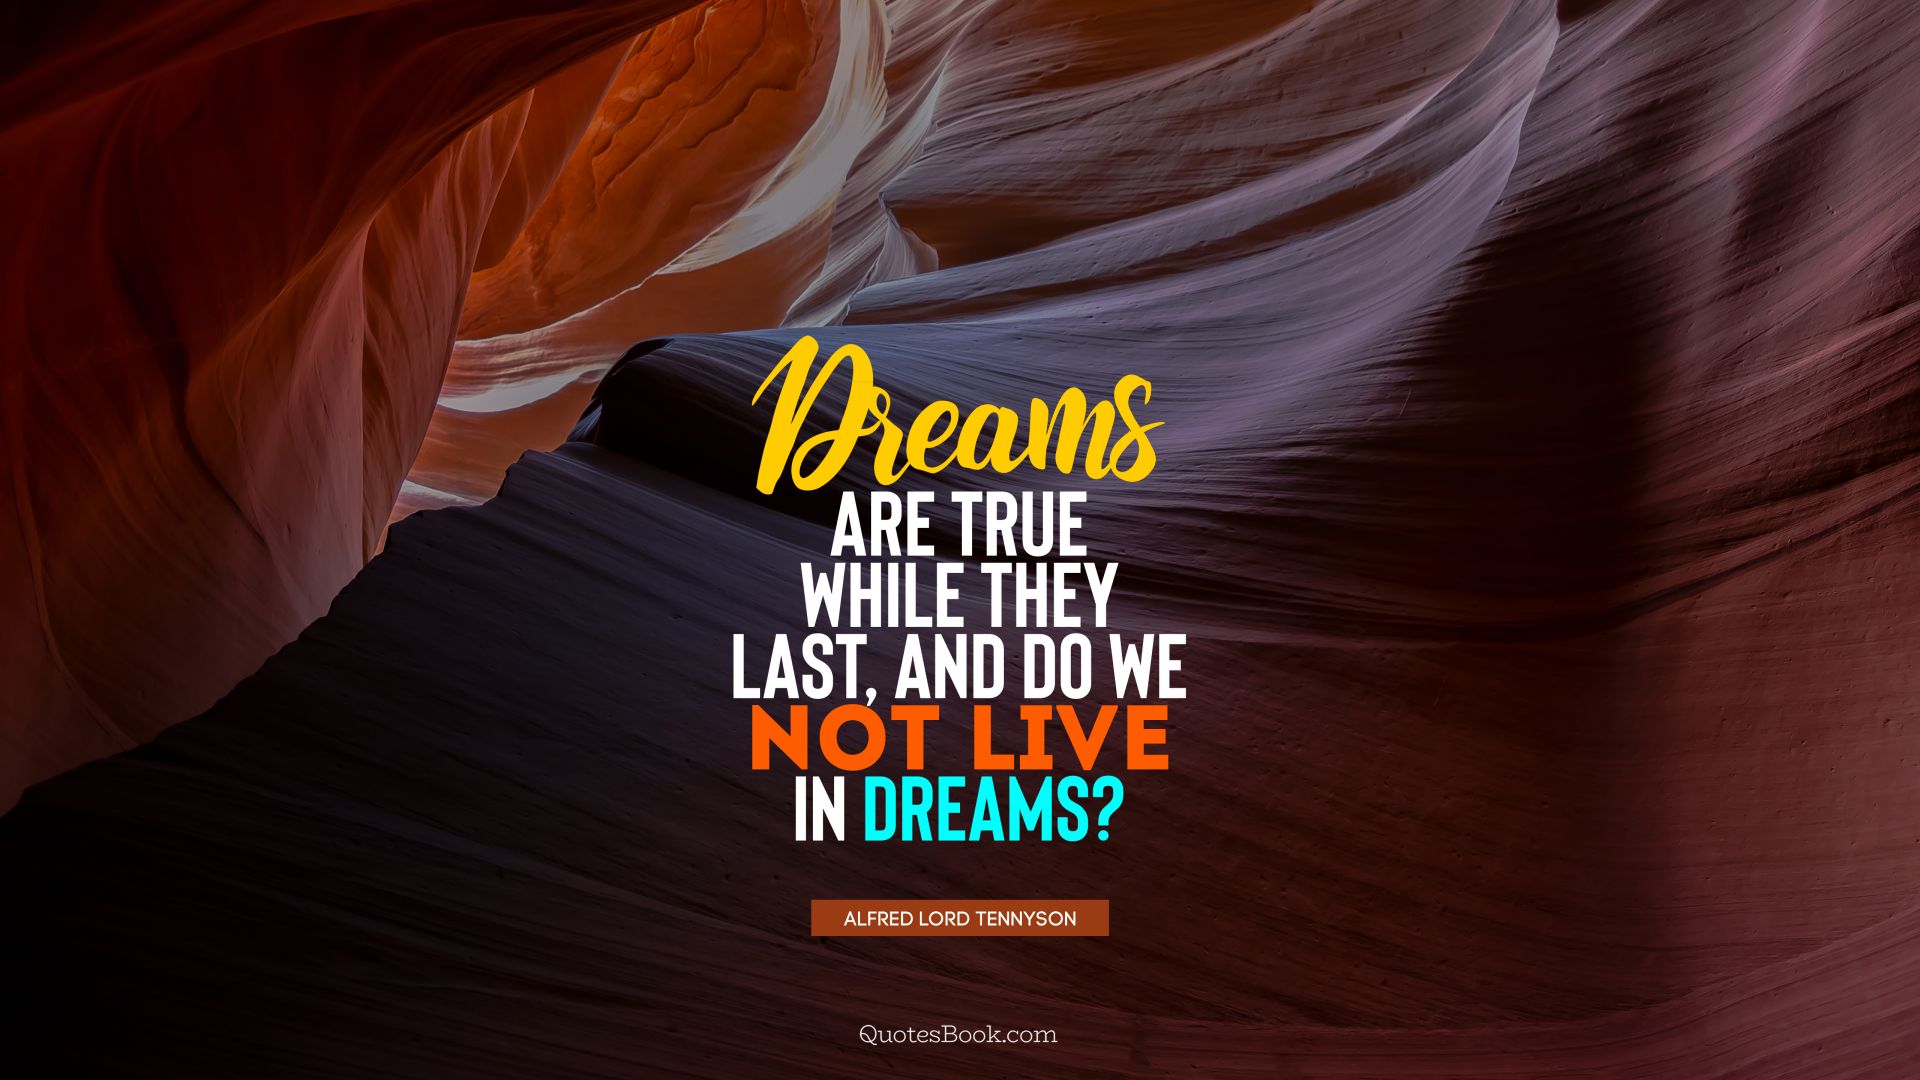 Dreams are true while they last, and do we not live in dreams?. - Quote by Alfred Lord Tennyson